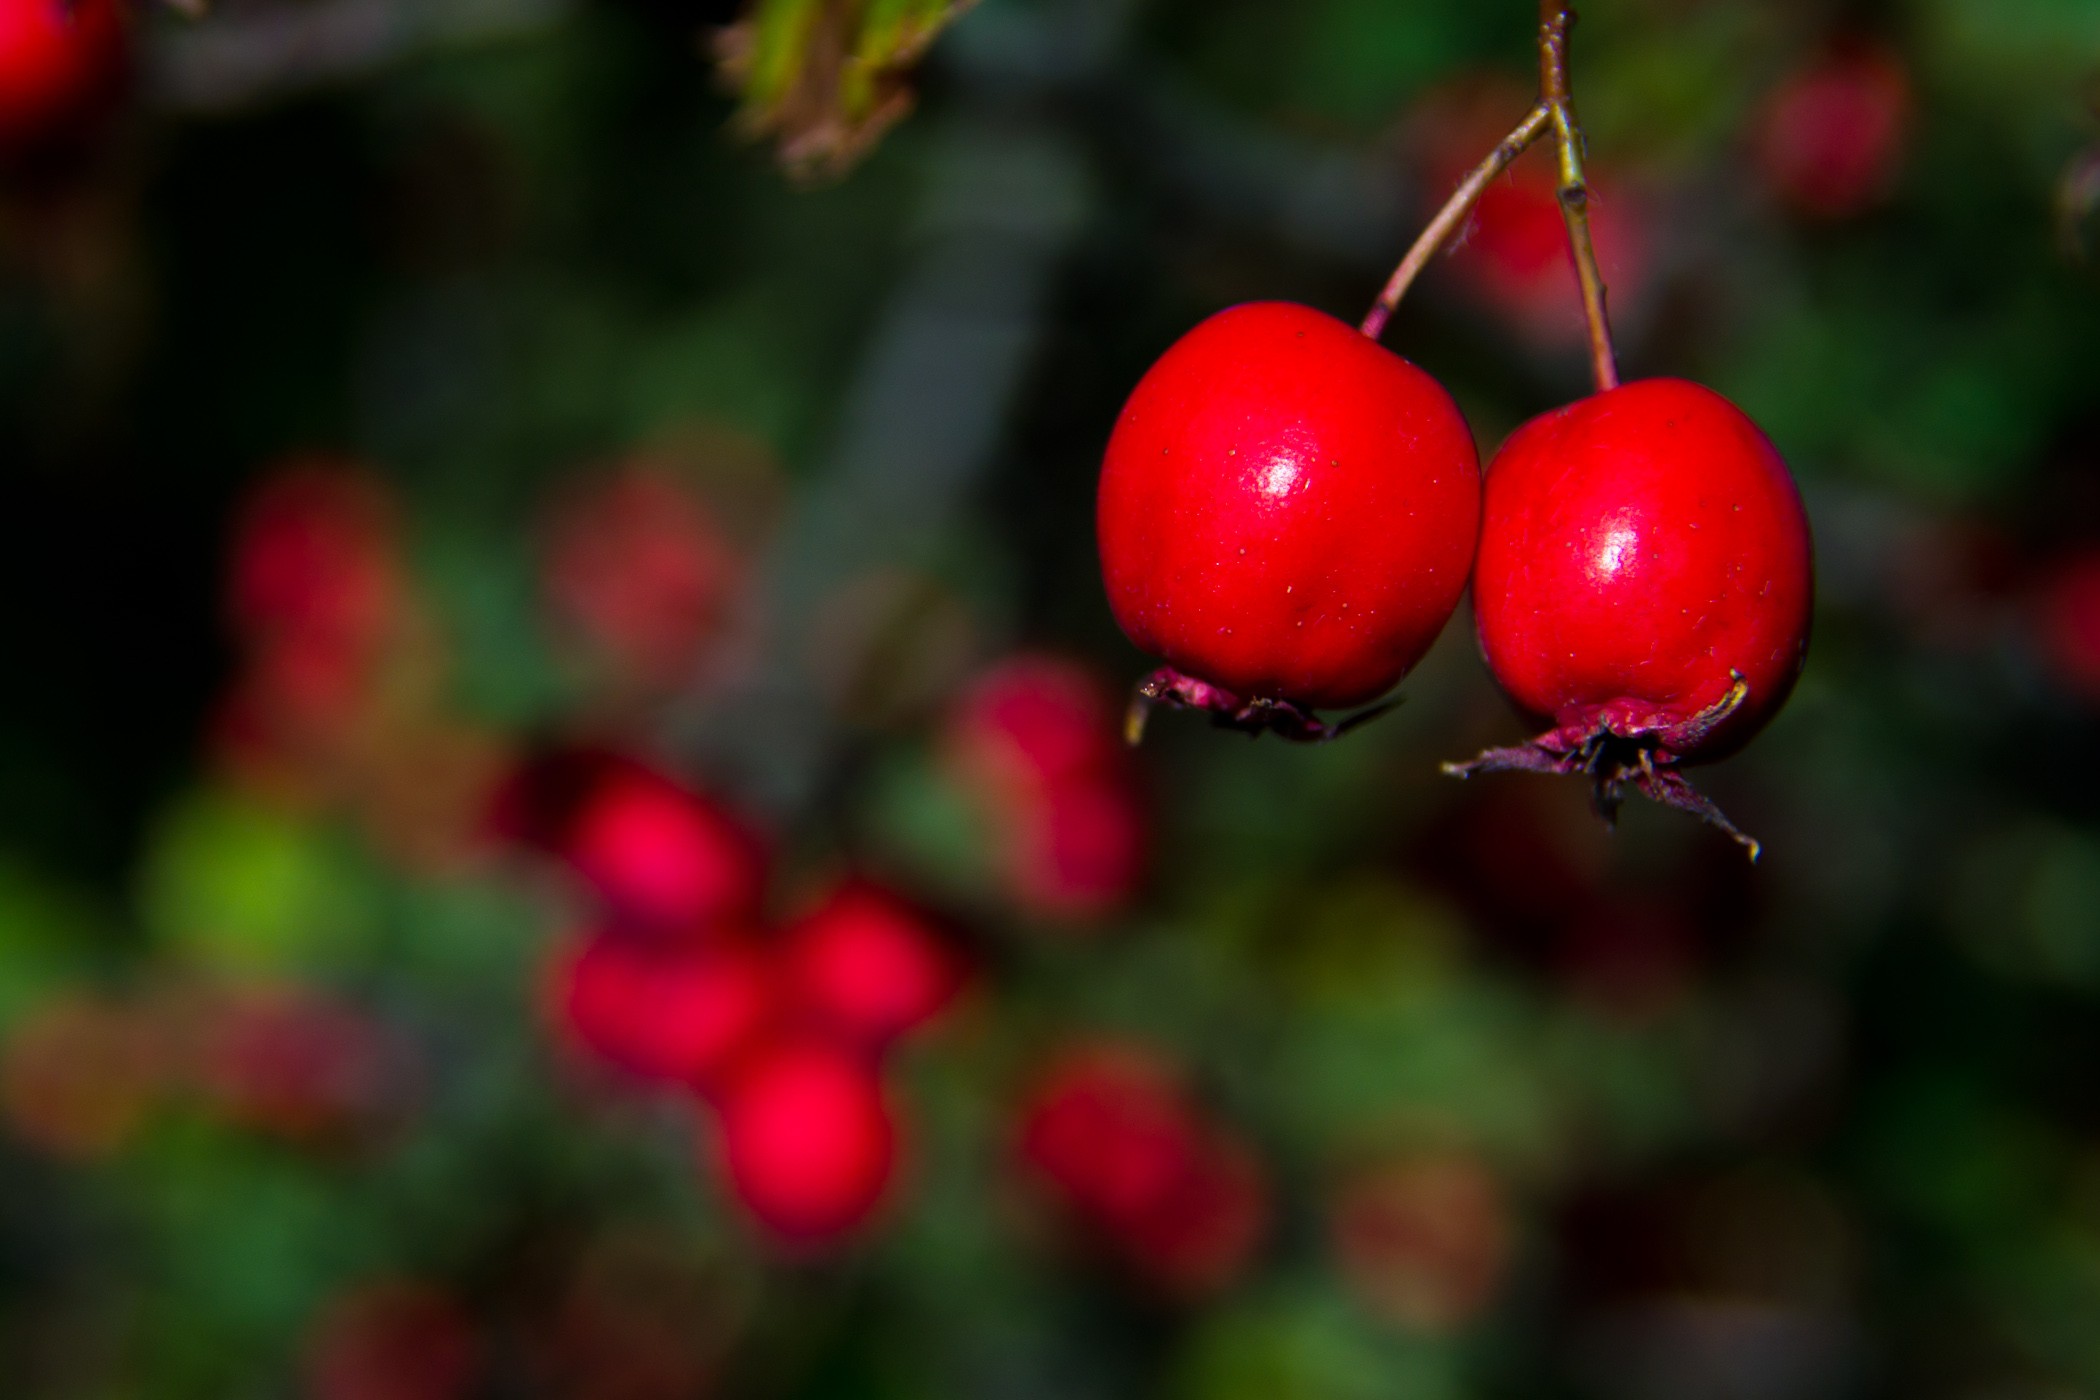 berries_by_pianoblack97-d49zycp.jpg